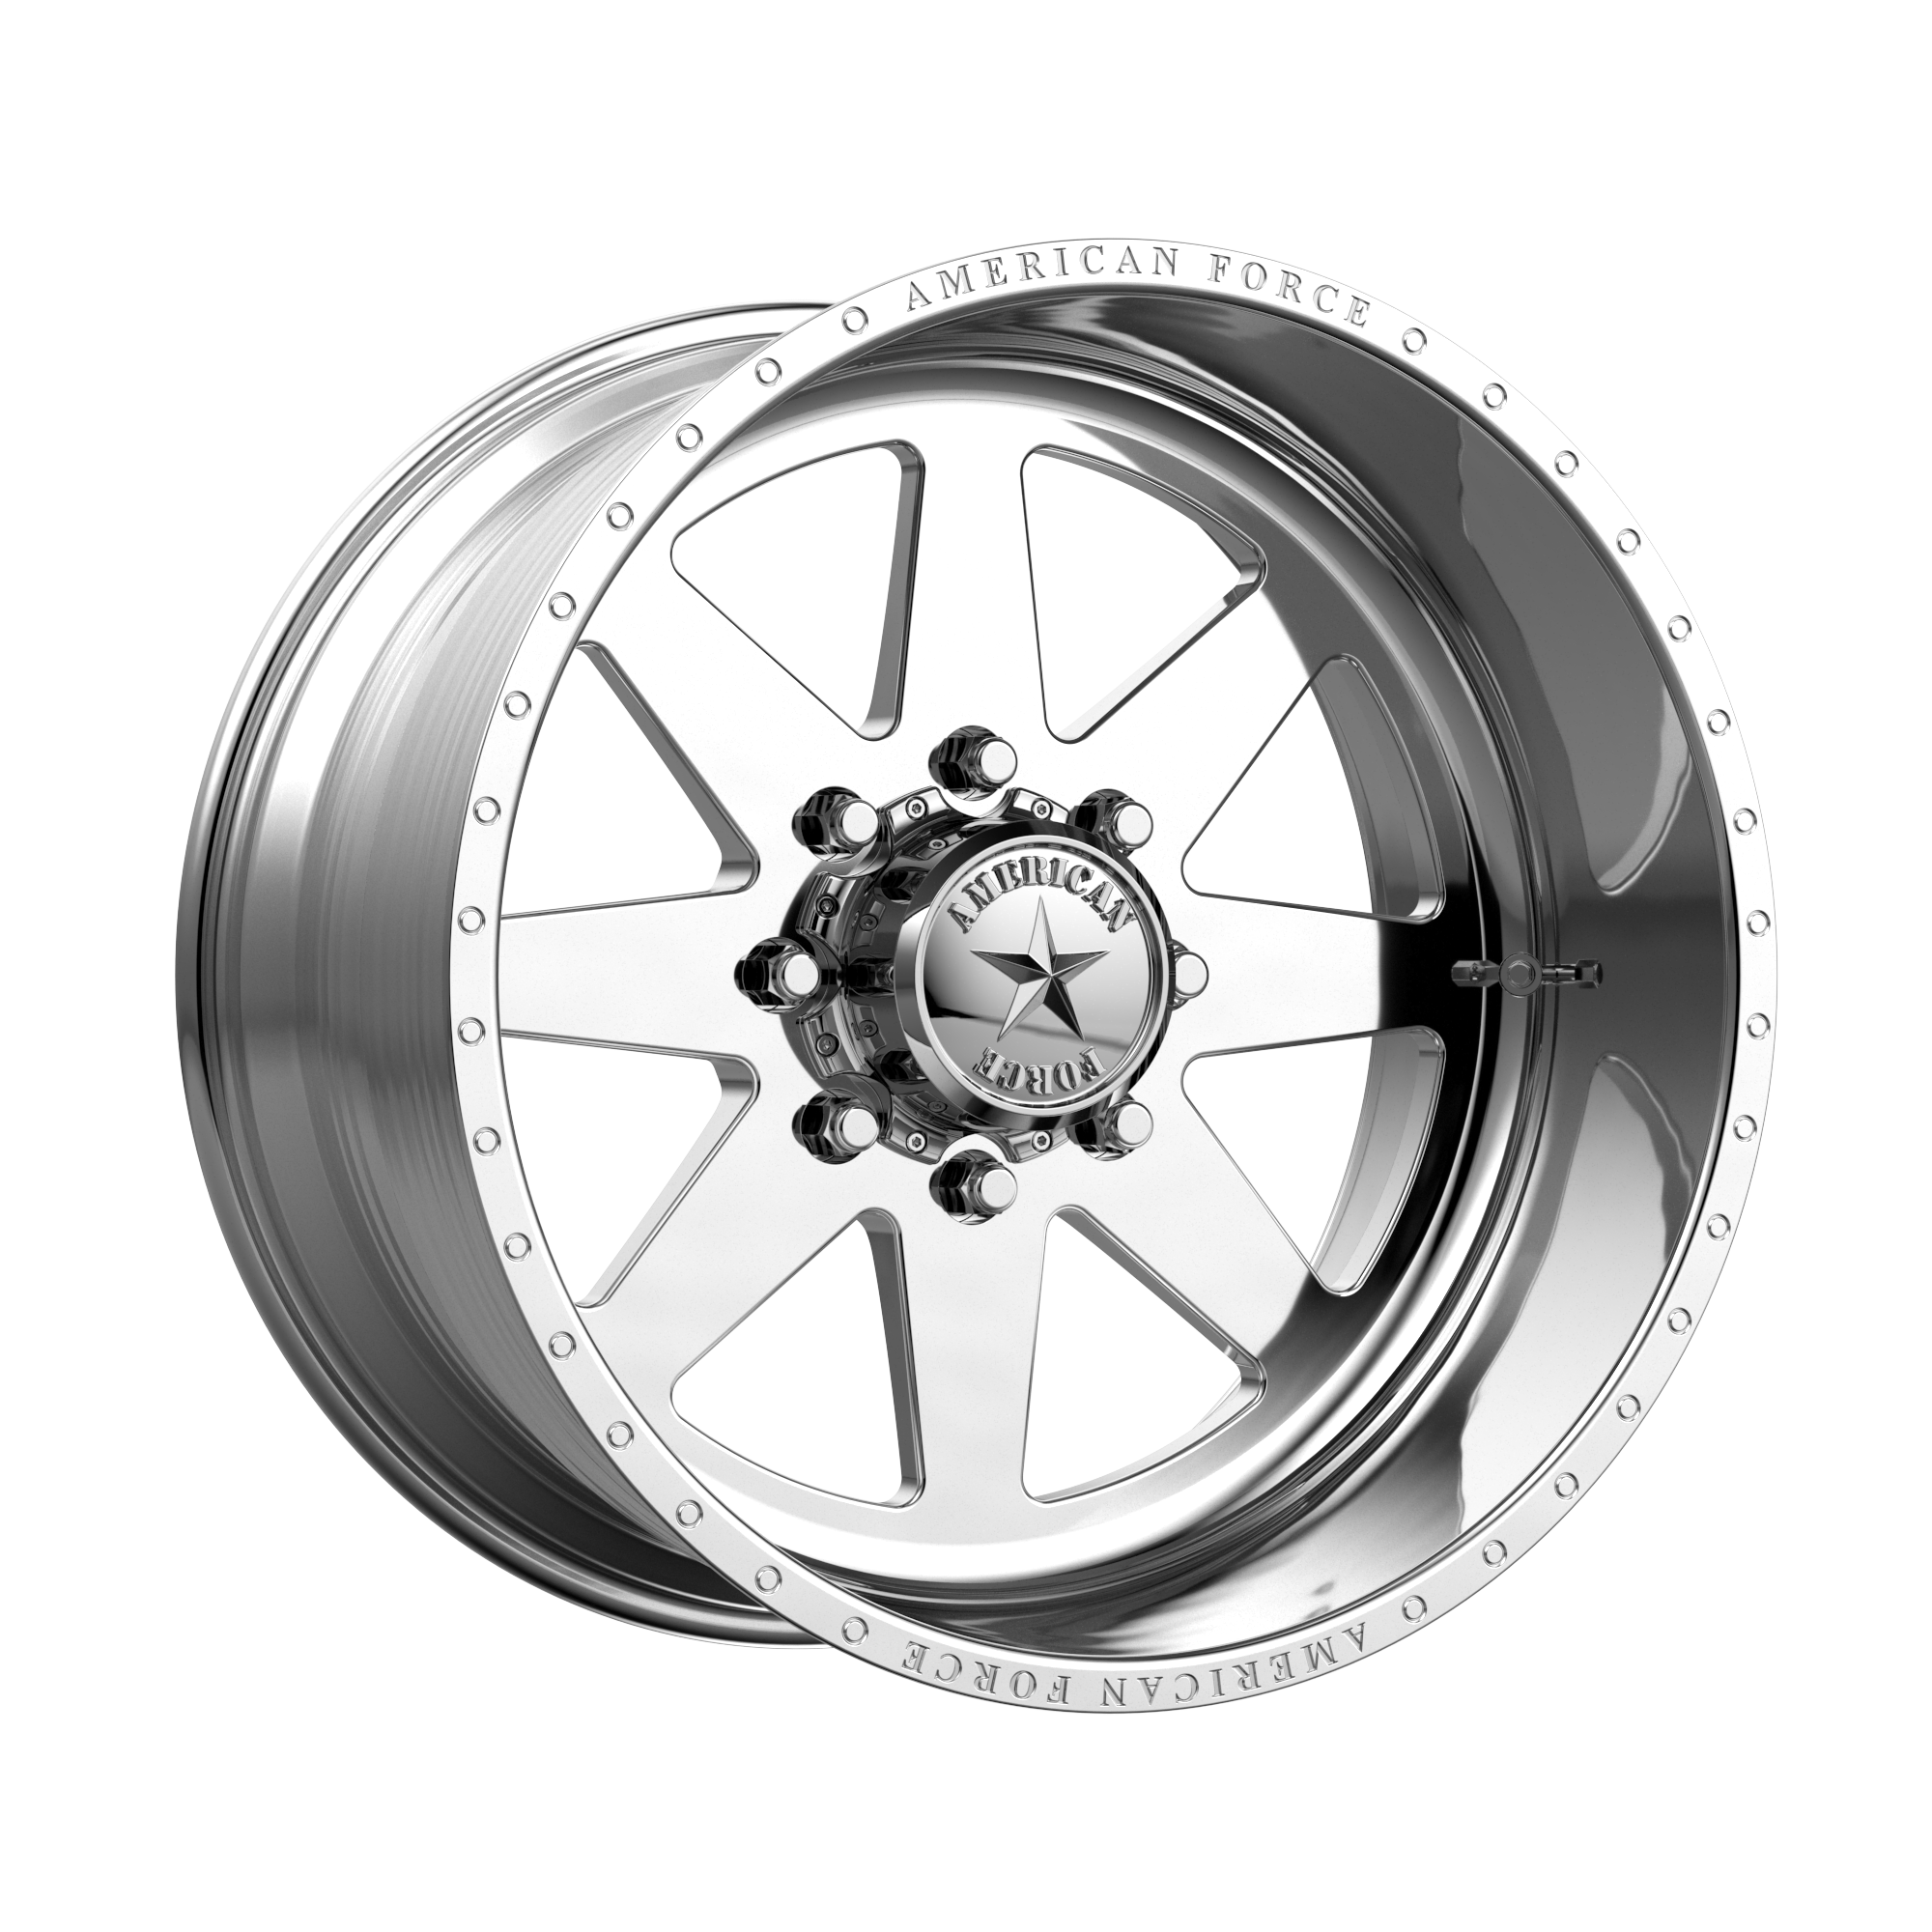 INDEPENDENCE SS 20x10 6x139.70 POLISHED (-25 mm) - Tires and Engine Performance